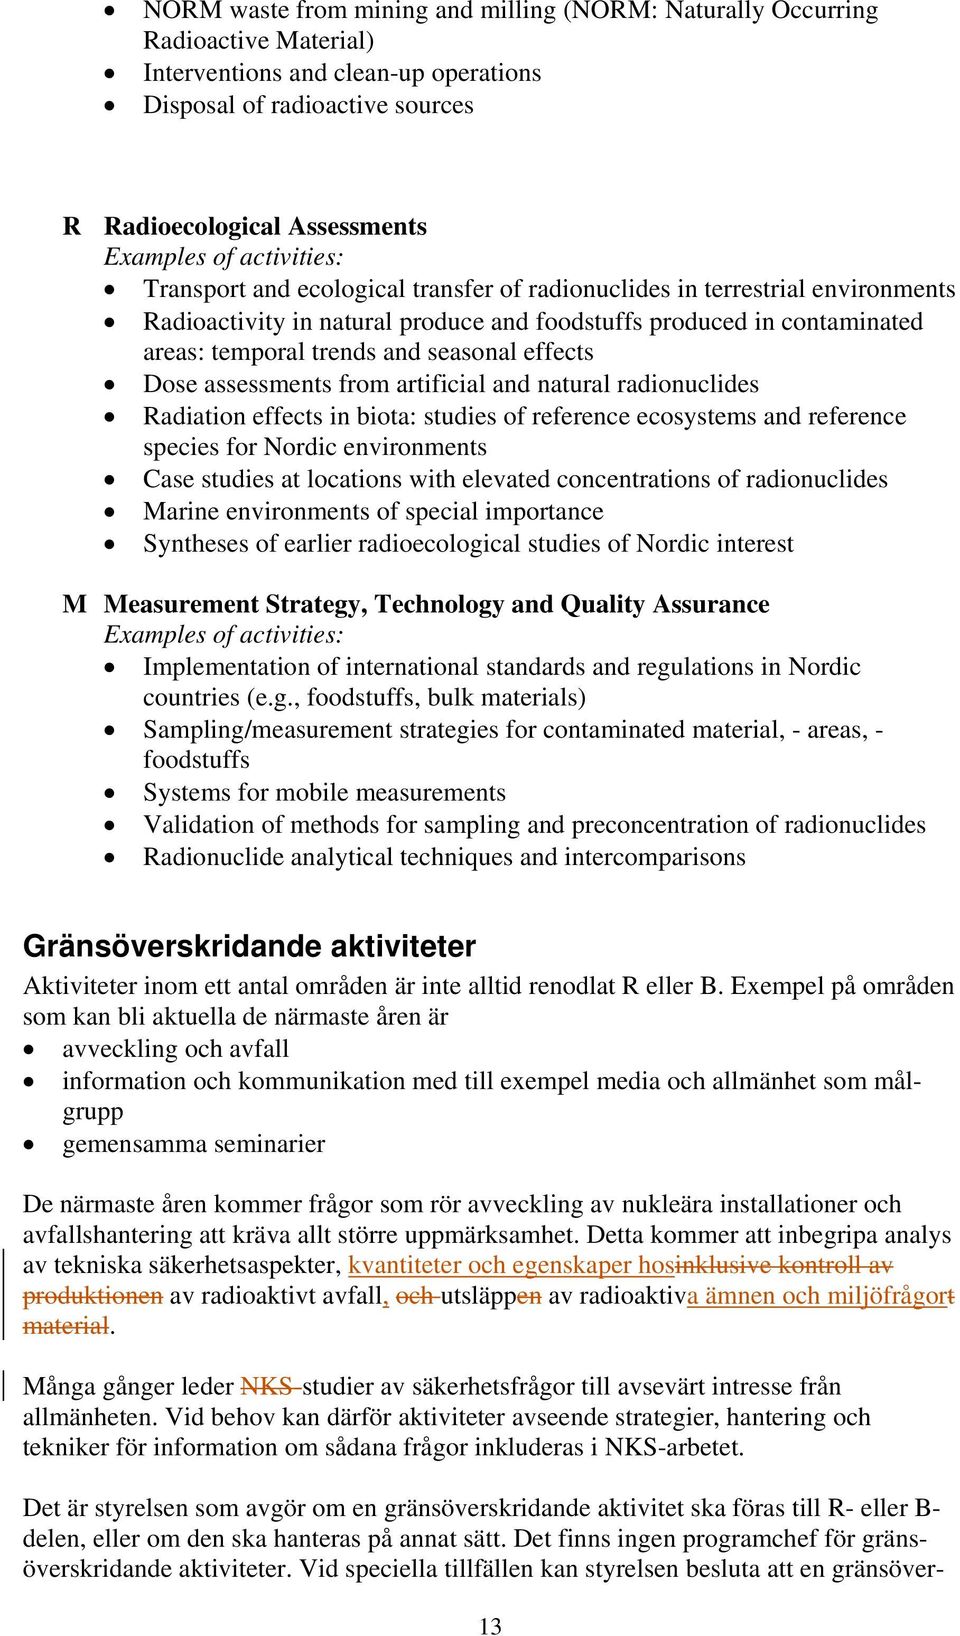 effects Dose assessments from artificial and natural radionuclides Radiation effects in biota: studies of reference ecosystems and reference species for Nordic environments Case studies at locations